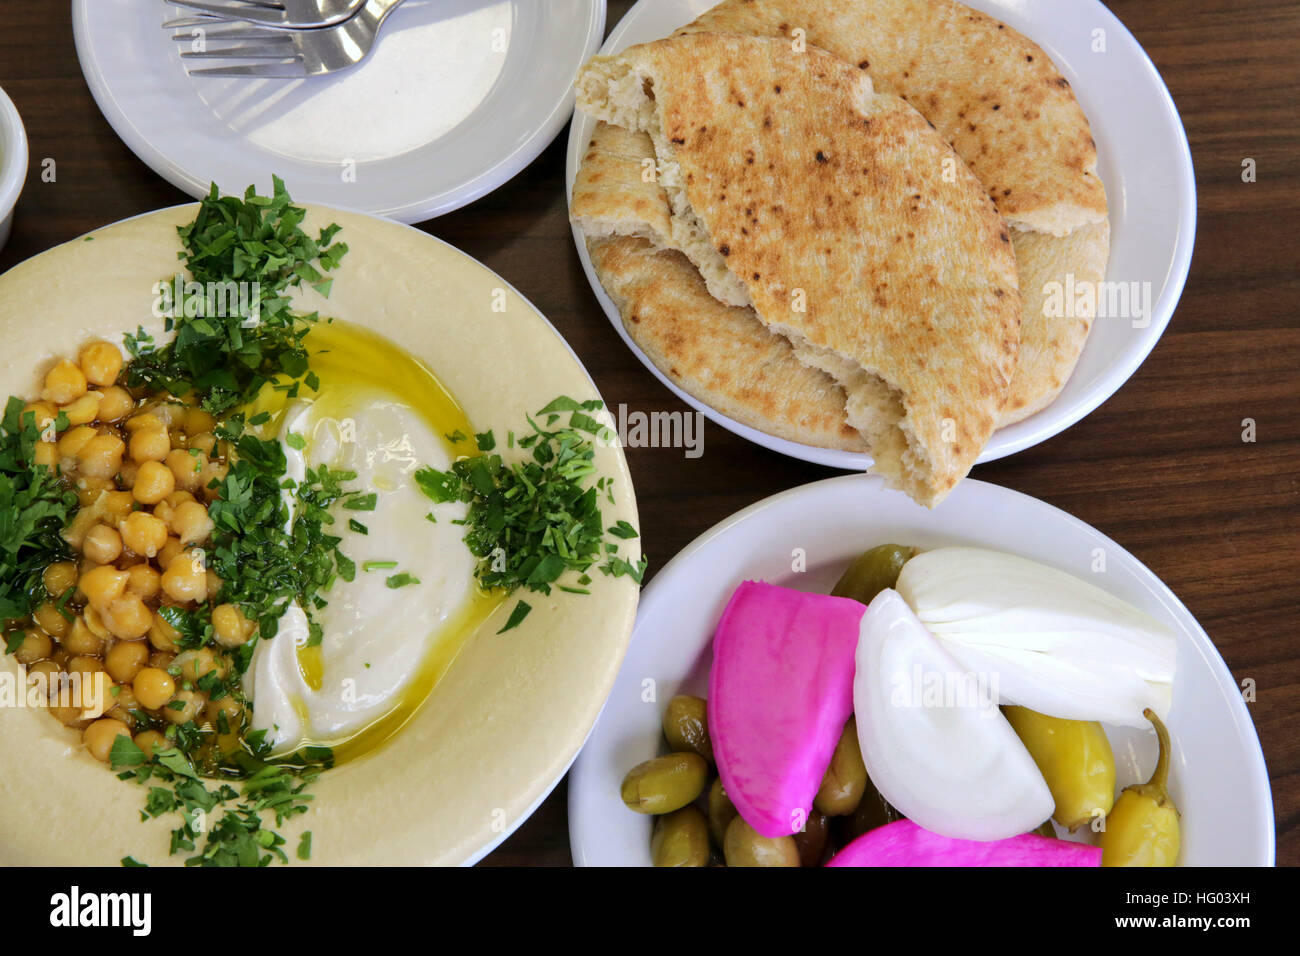 Hummus. A Levantine Arab dip or spread made from cooked, mashed ...